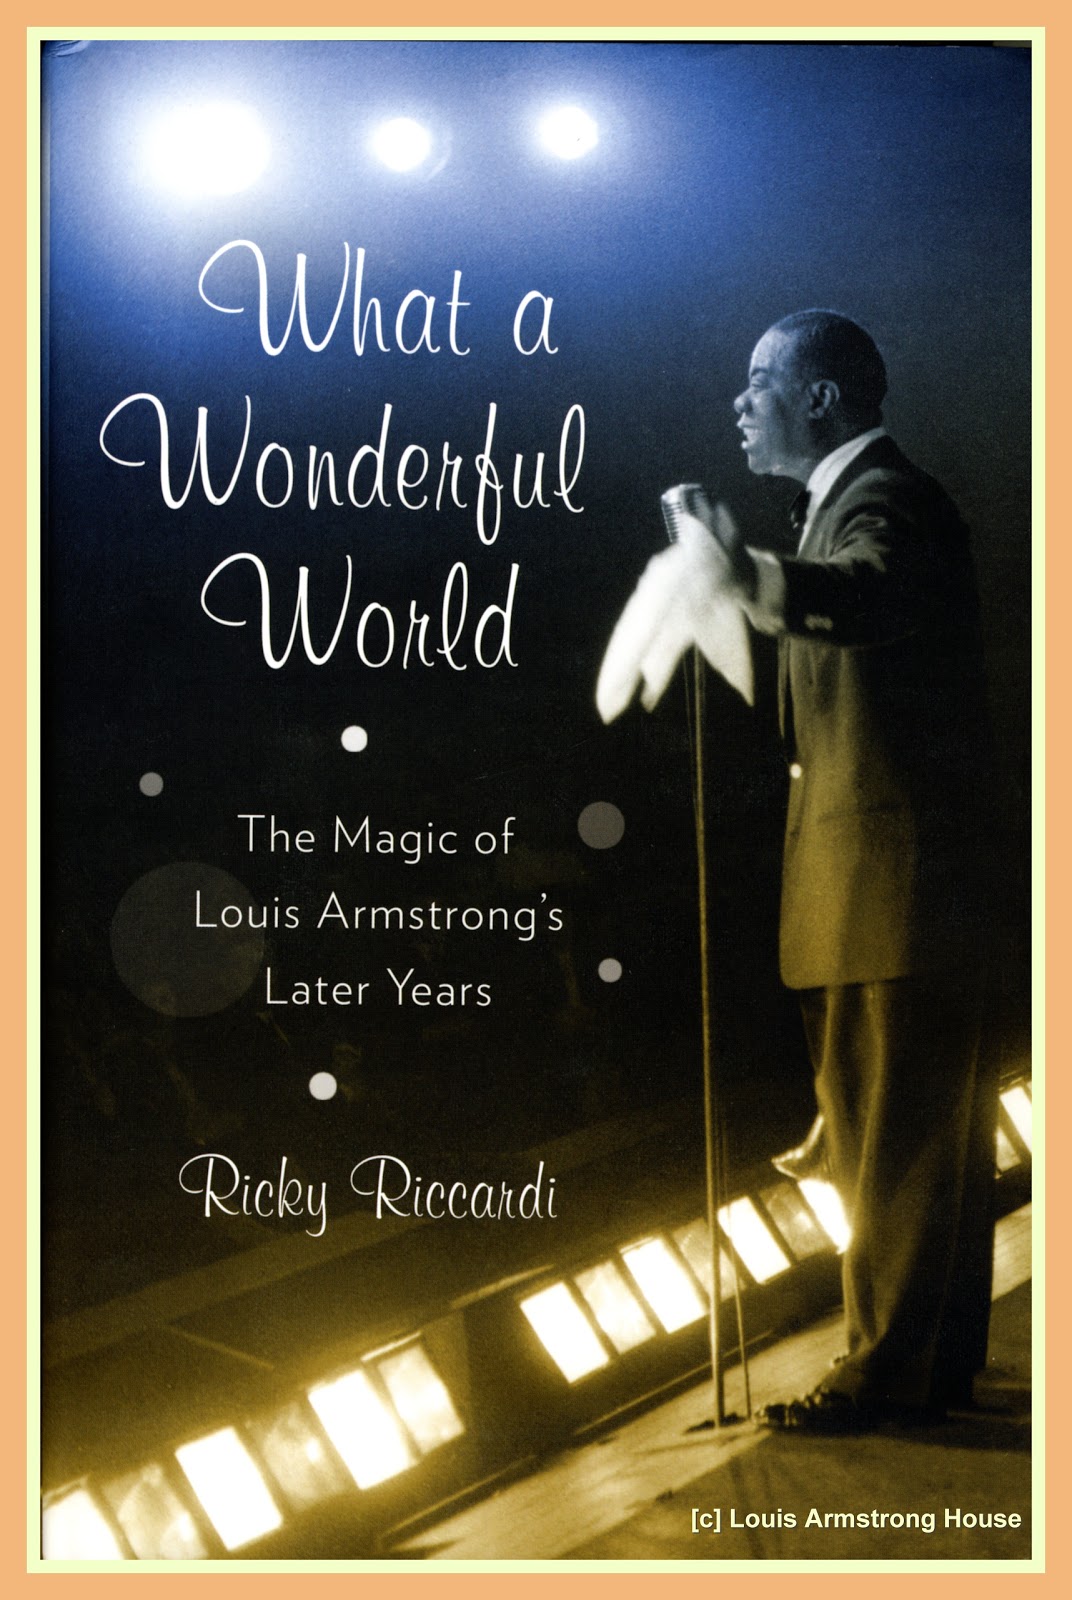 Jazz Profiles: Ricky Riccardi: An Interview with the Author of “What a Wonderful World: The ...